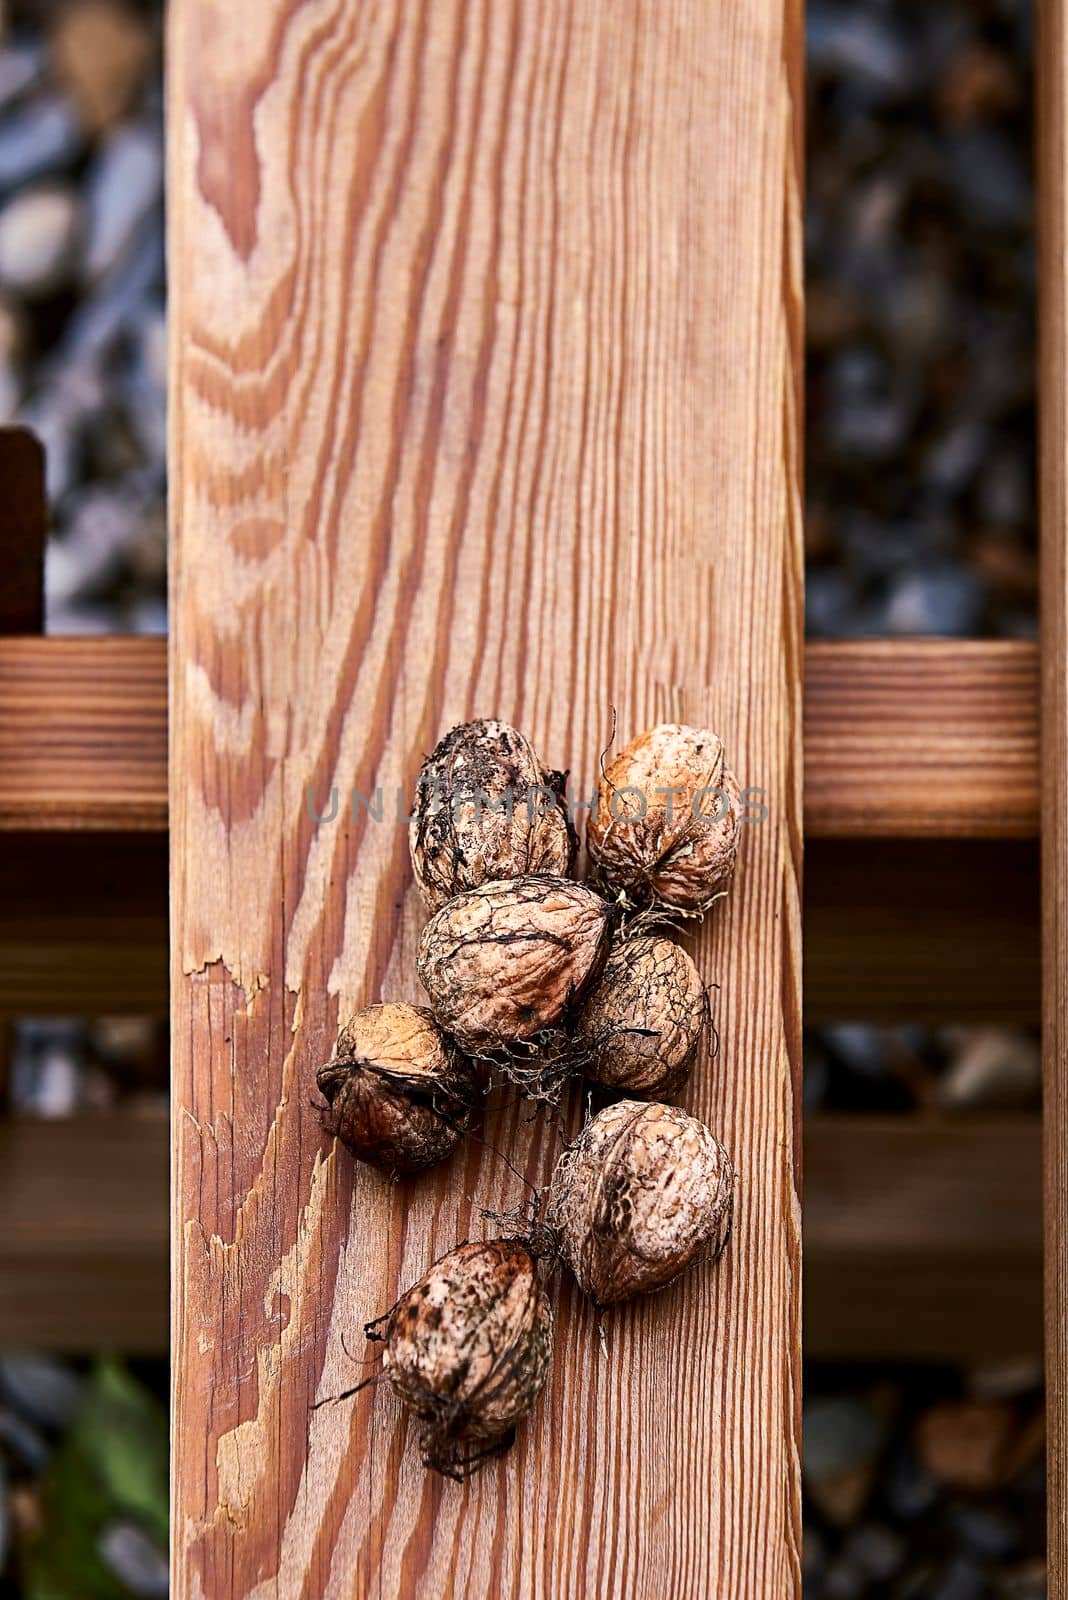 Group of in-shell walnuts stacked on wooden board by raul_ruiz